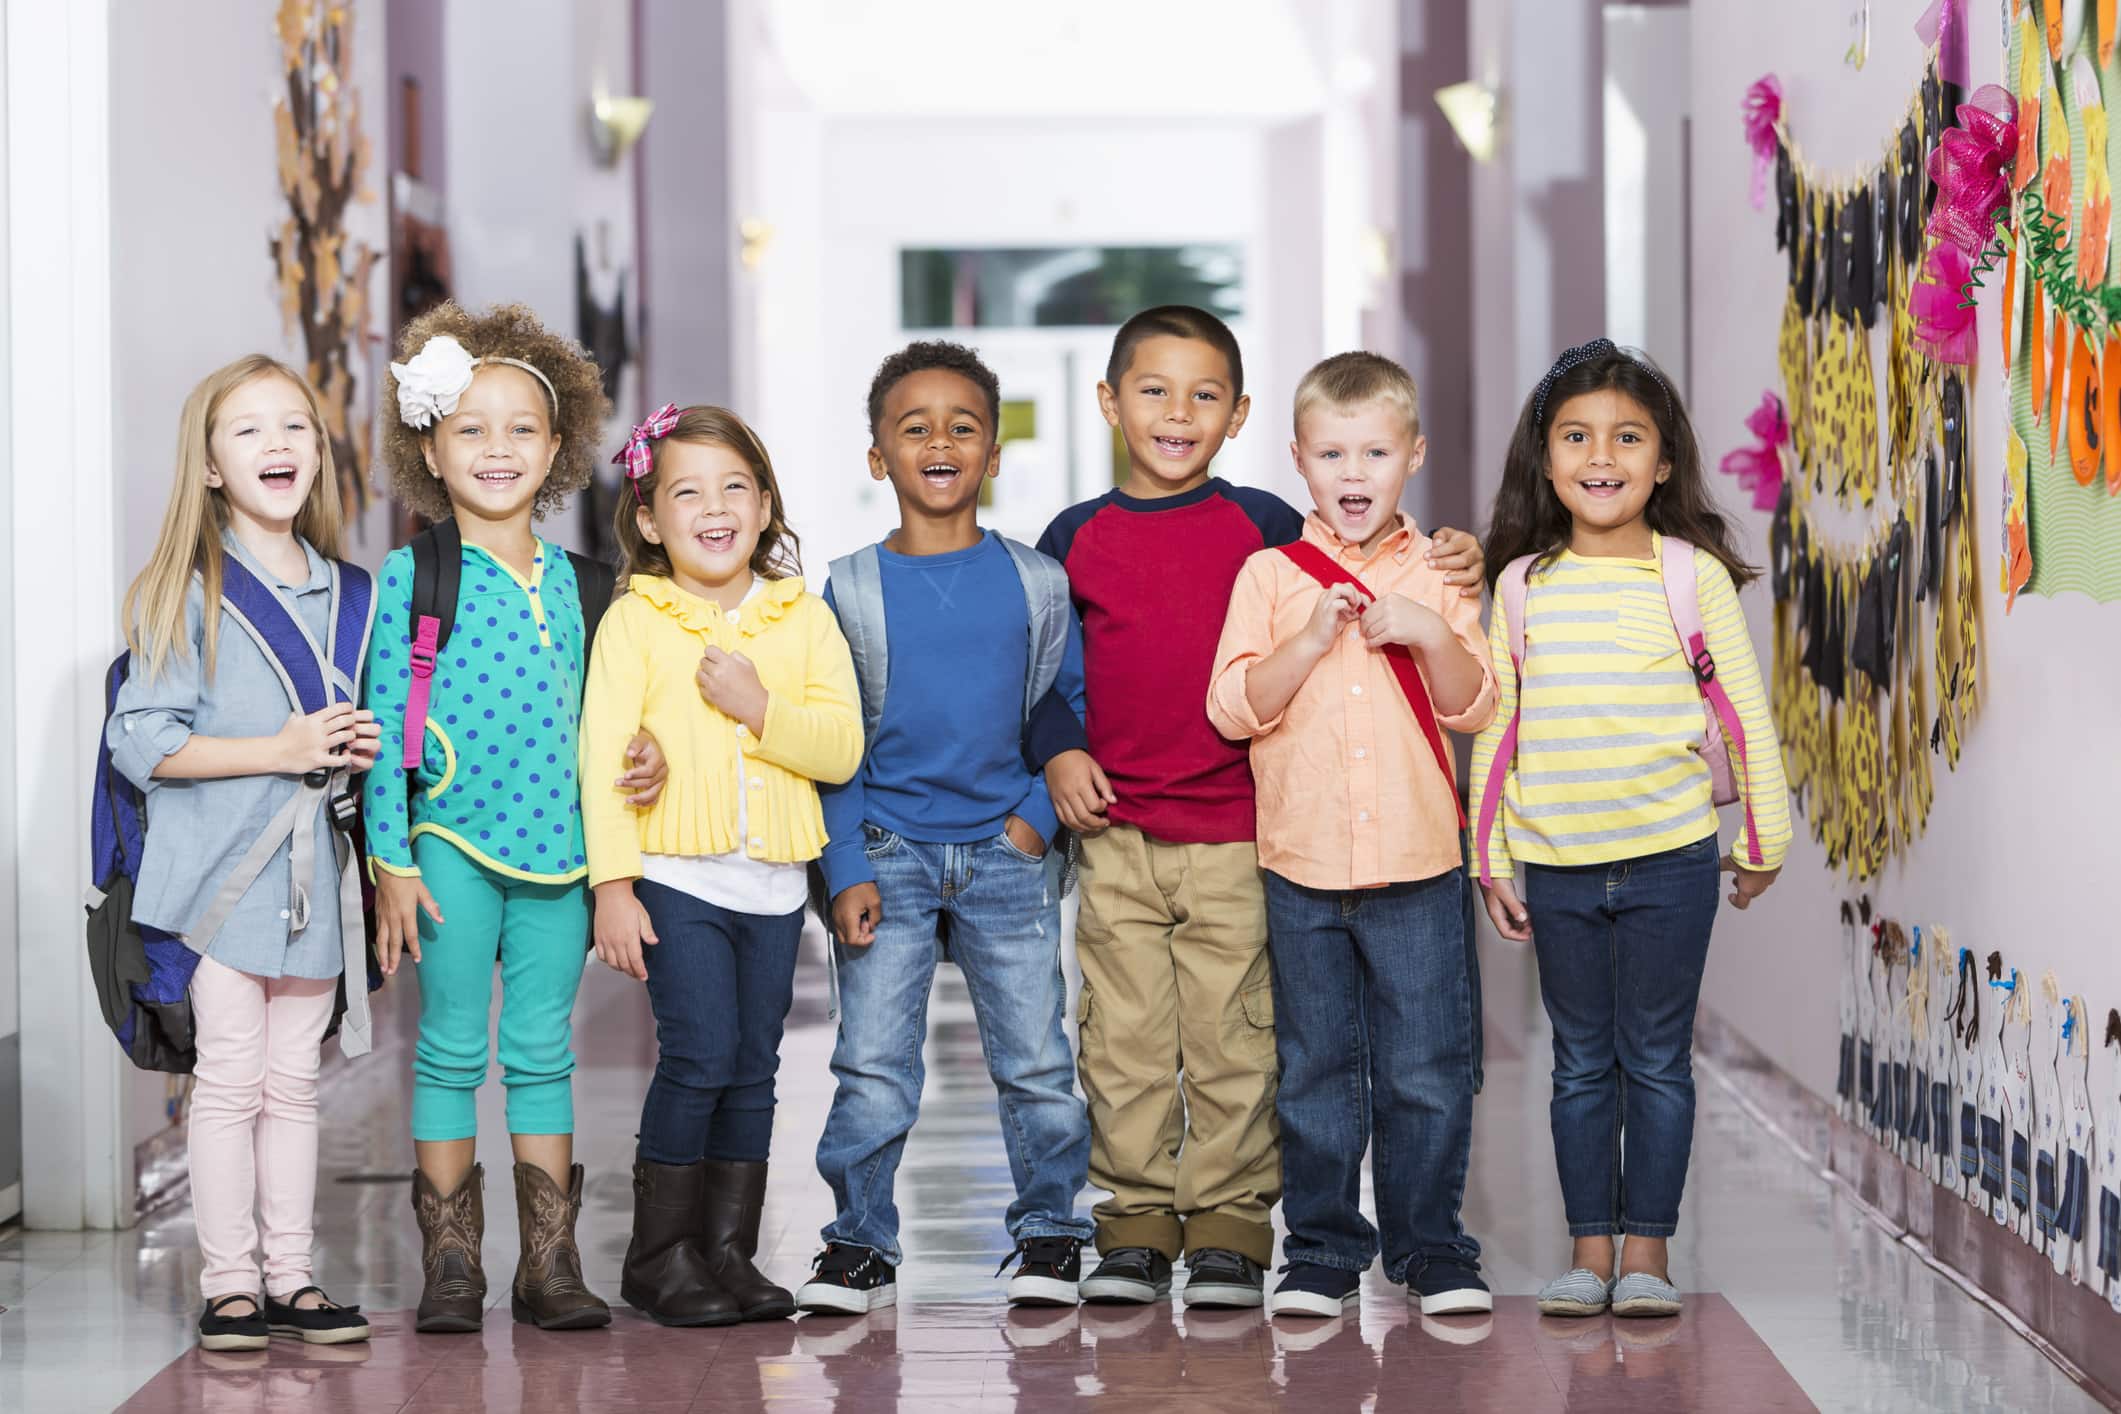 A multi-ethnic group of seven children standing in a row in a school hallway, laughing and smiling at the camera. The little boys and girls are kindergarten or preschool age, 4 to 6 years.